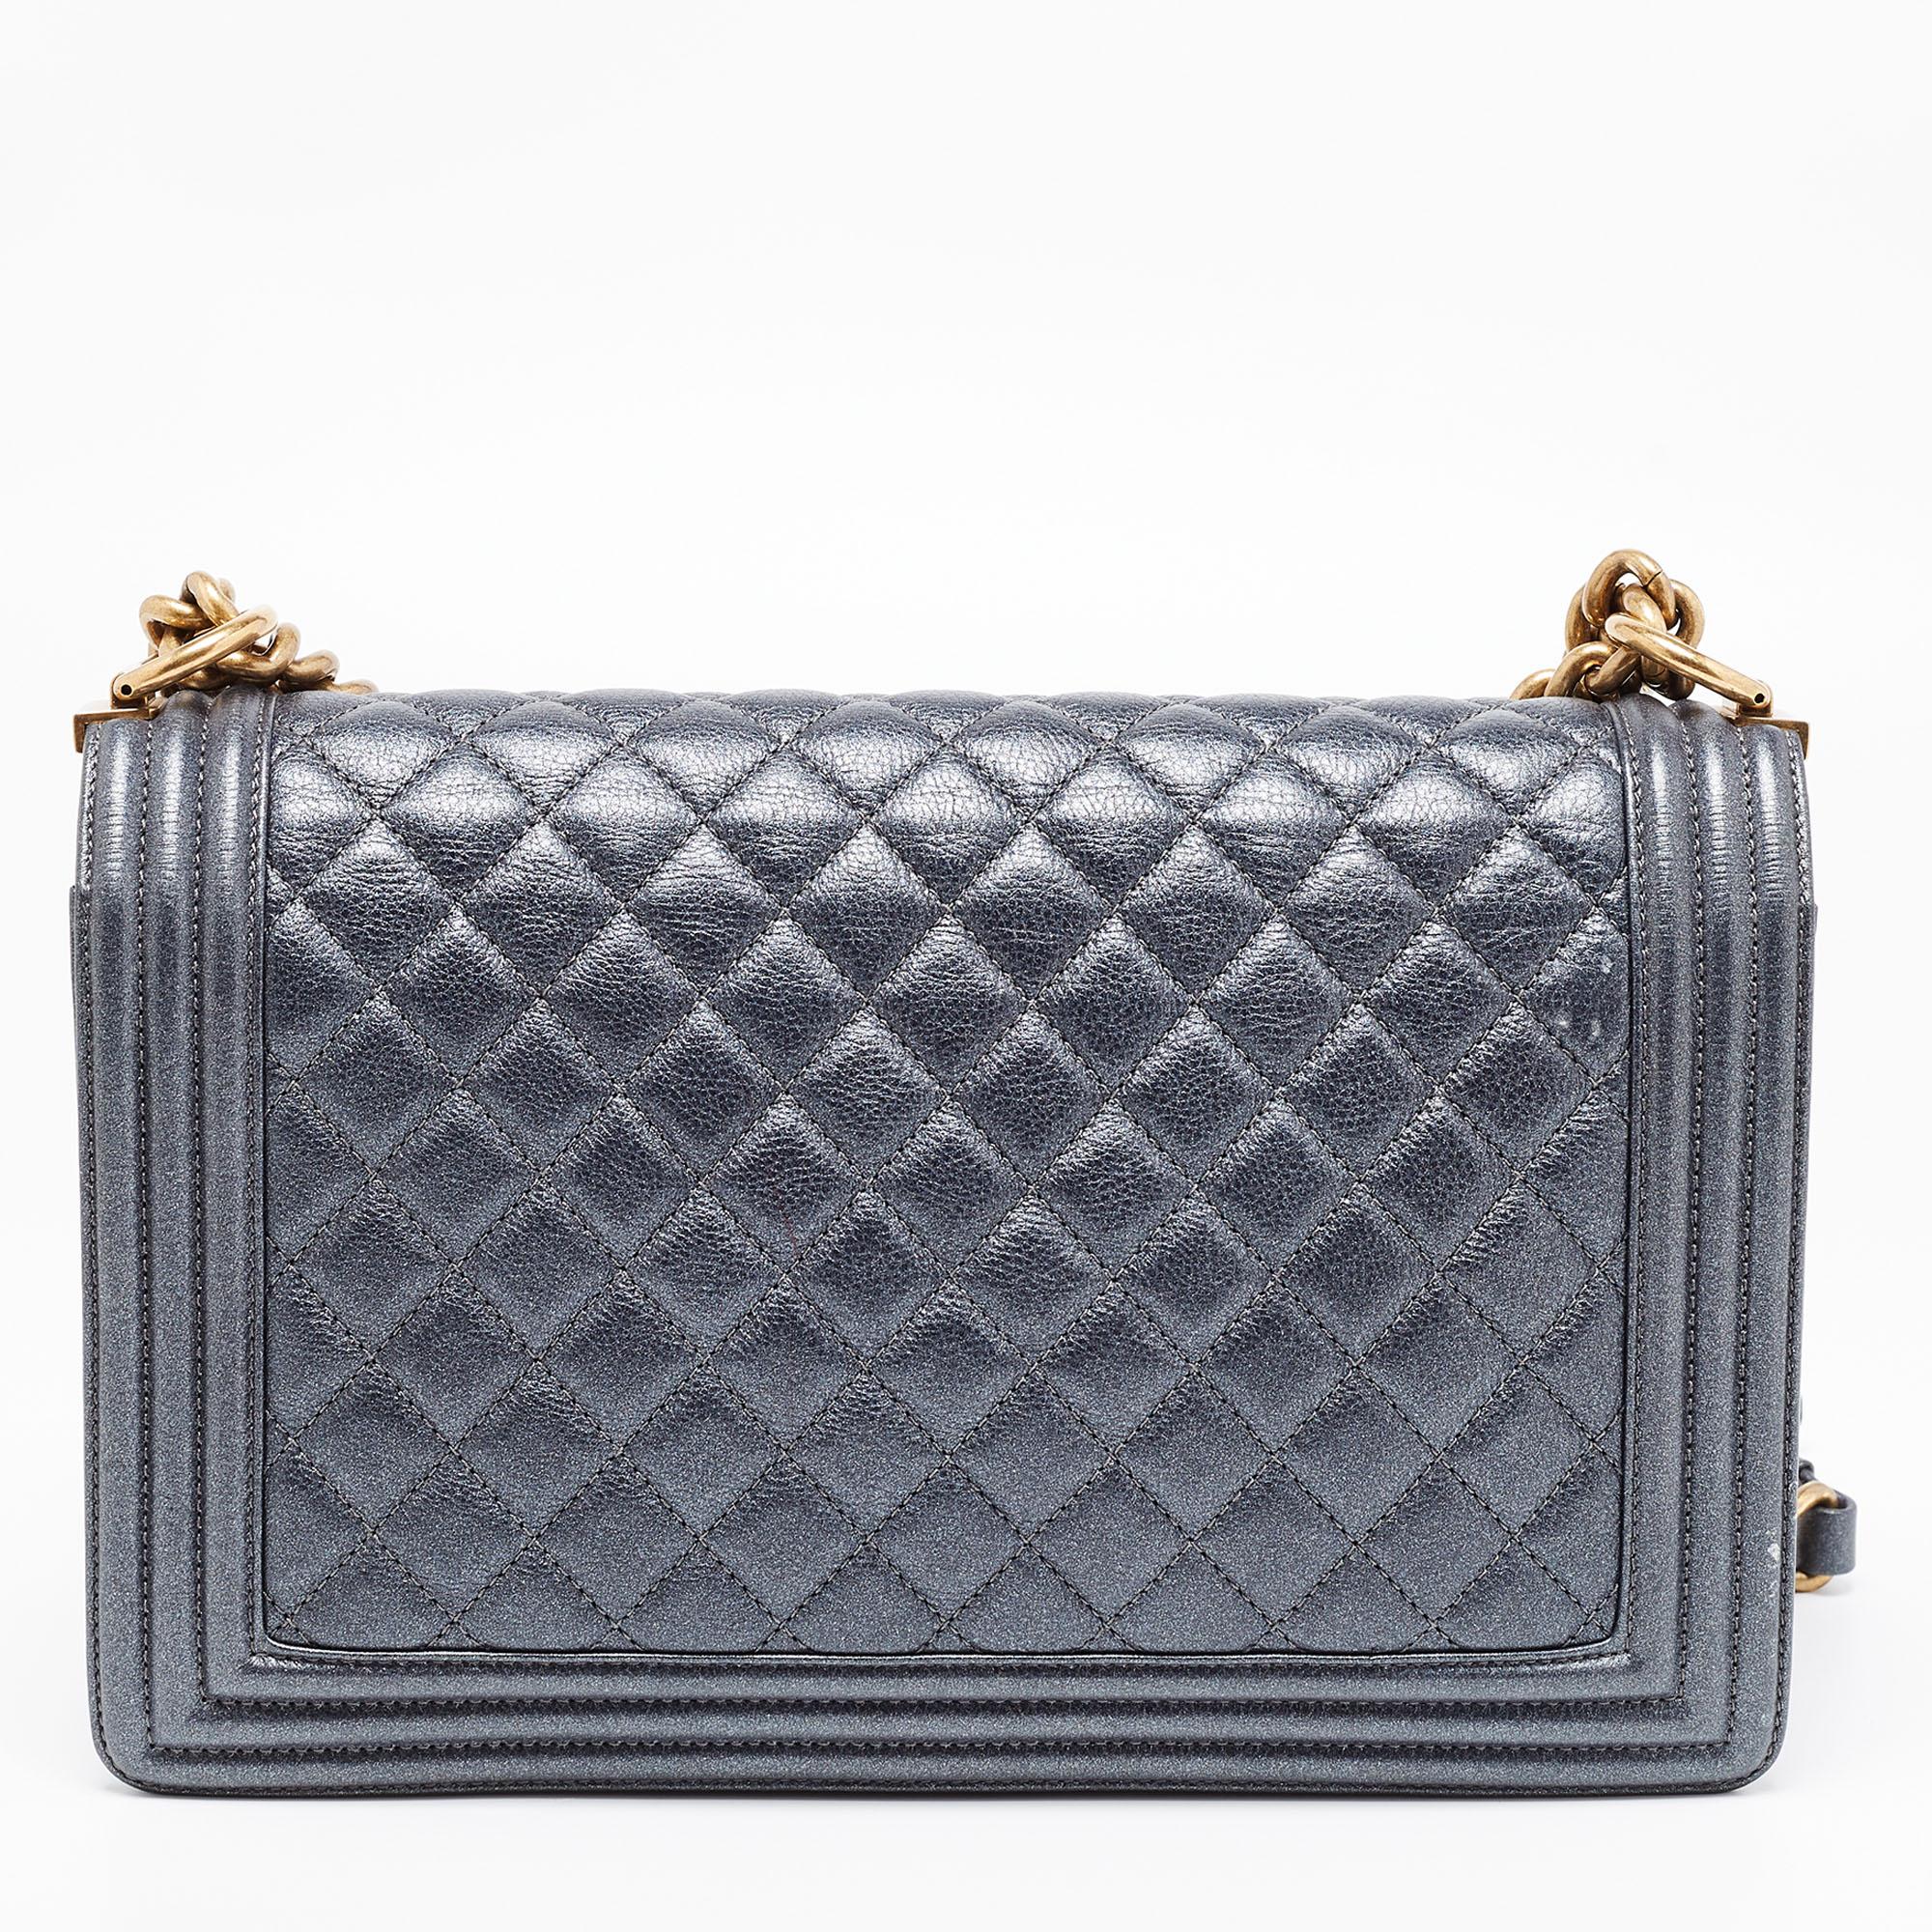 Introduced as a part of the Chanel Fall/Winter collection of 2011, the Boy flap bag is alluring and complemented with exquisite details. This grey creation is meticulously crafted from quilted leather and features side paneling, a chain-leather